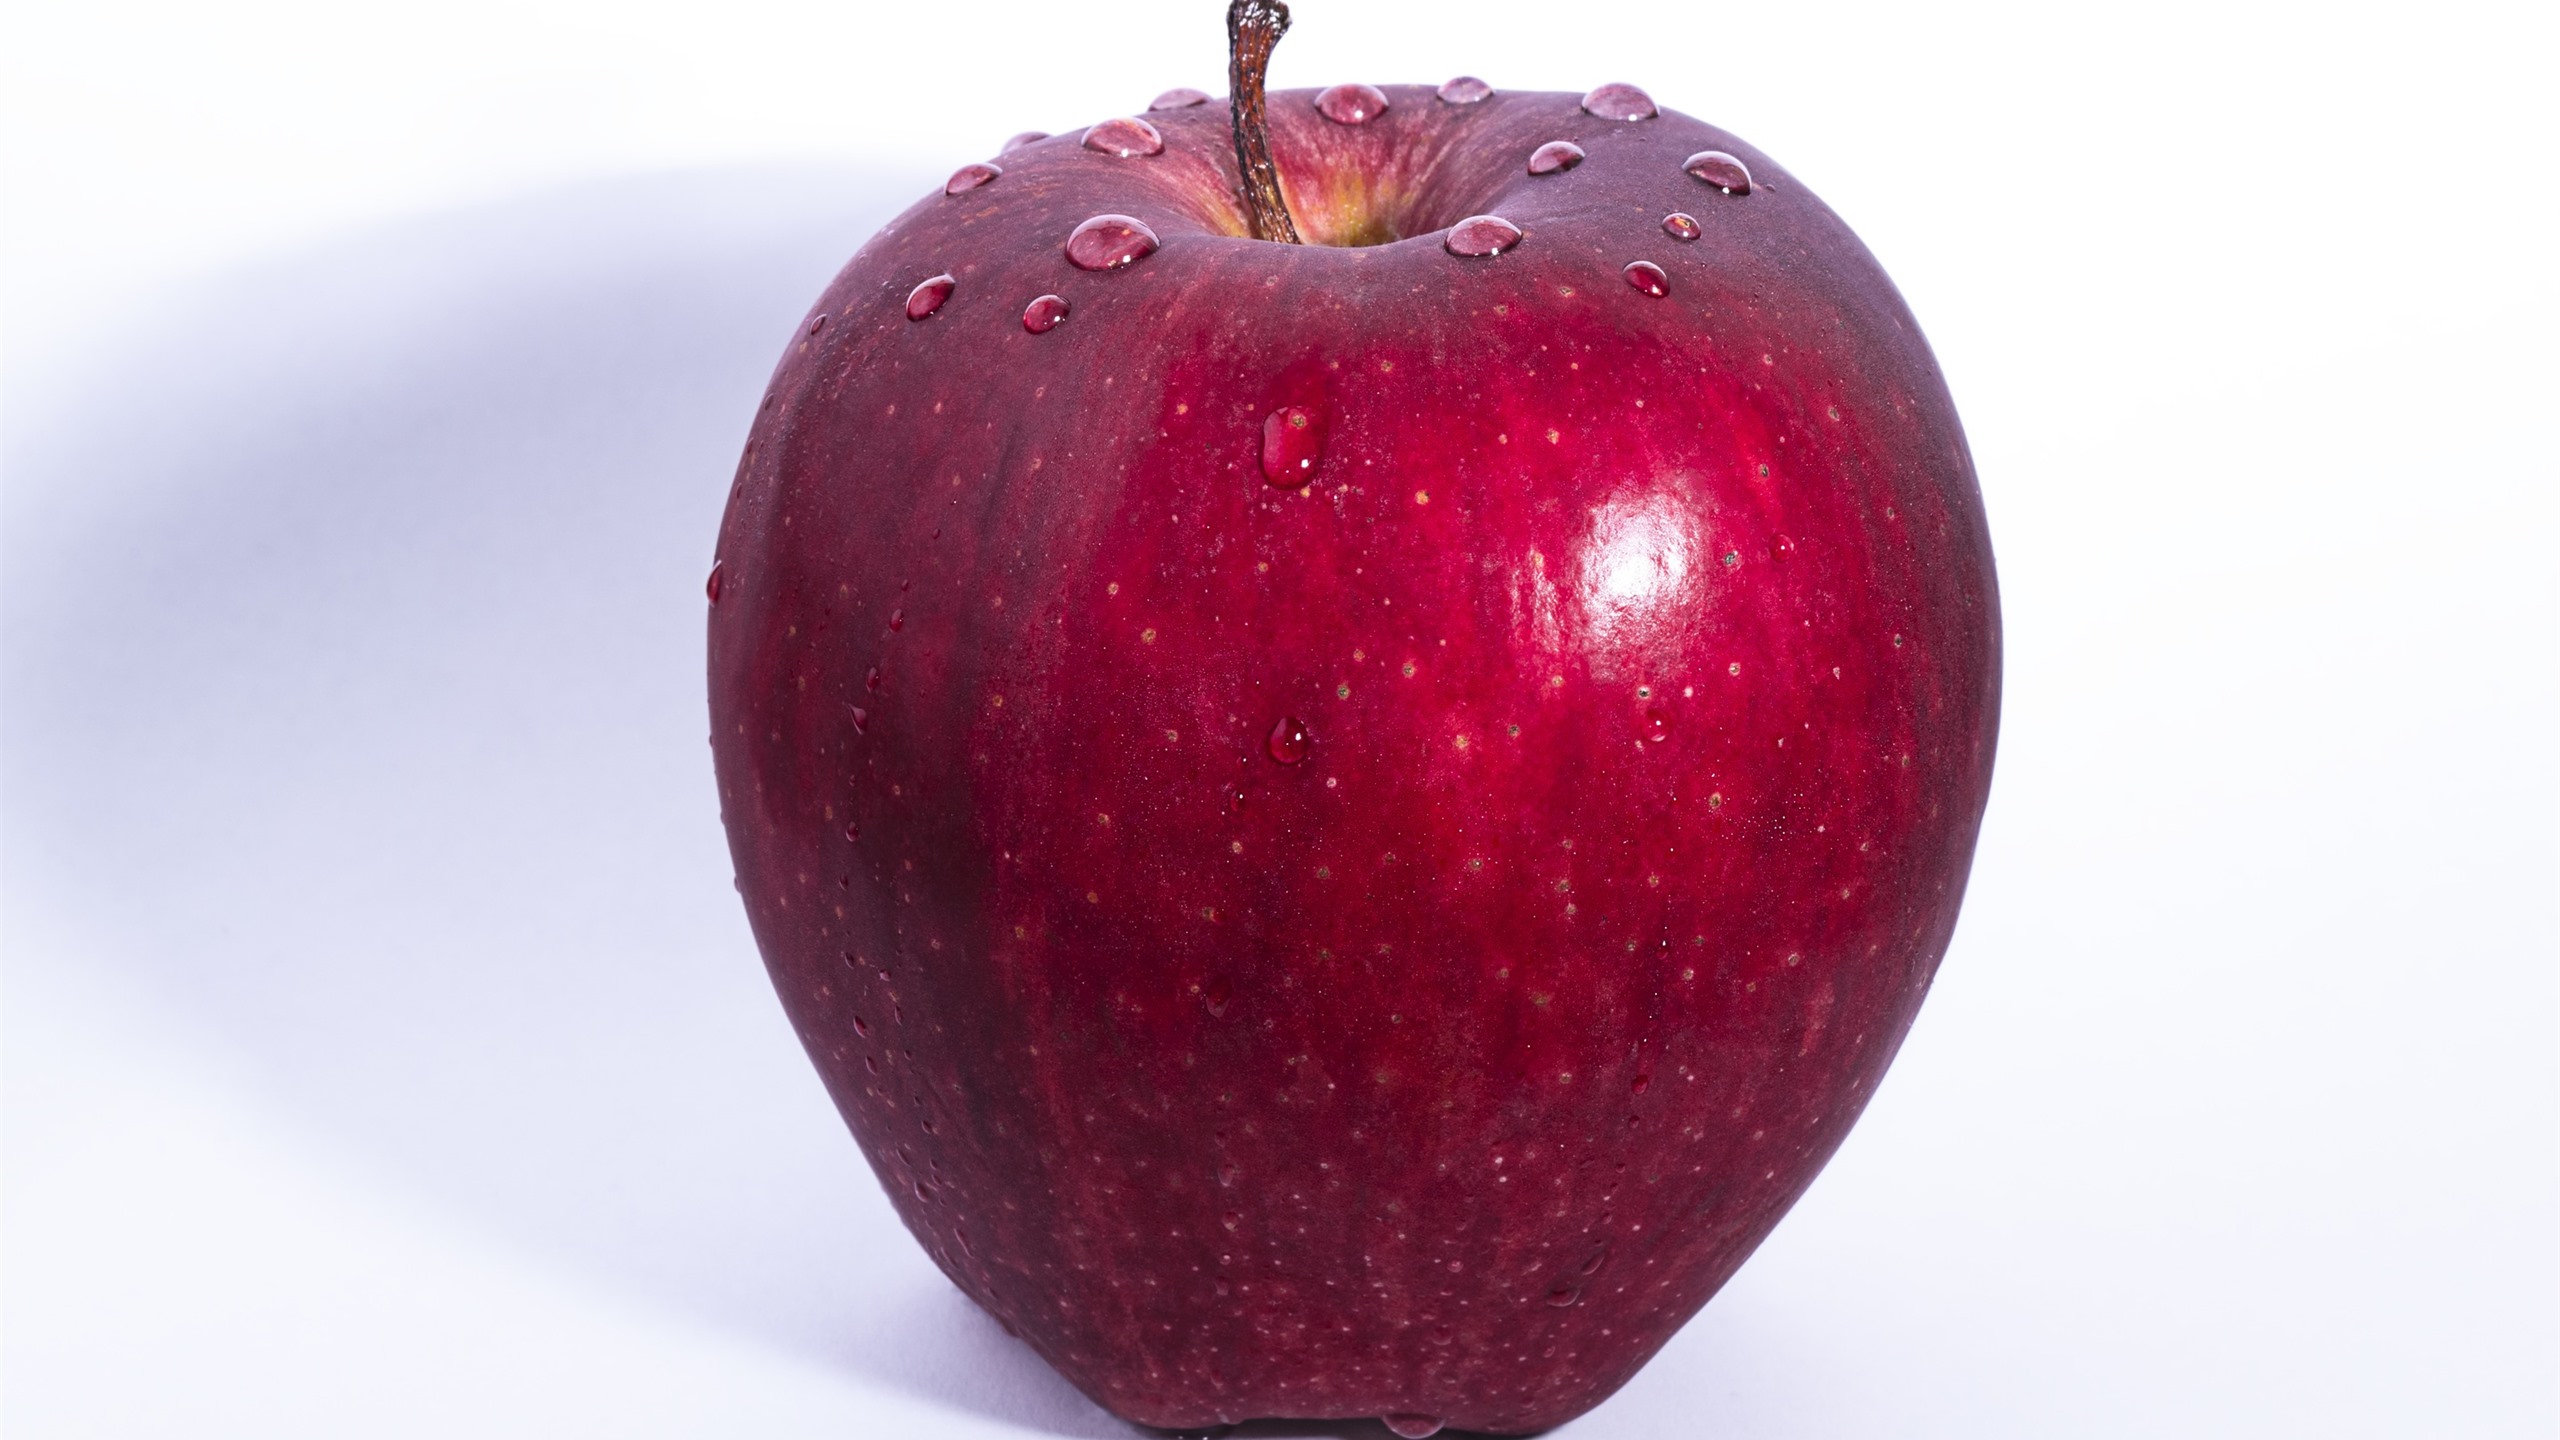 An Apple a Day Keeps the Doctor Away â€” Fact or Fiction?